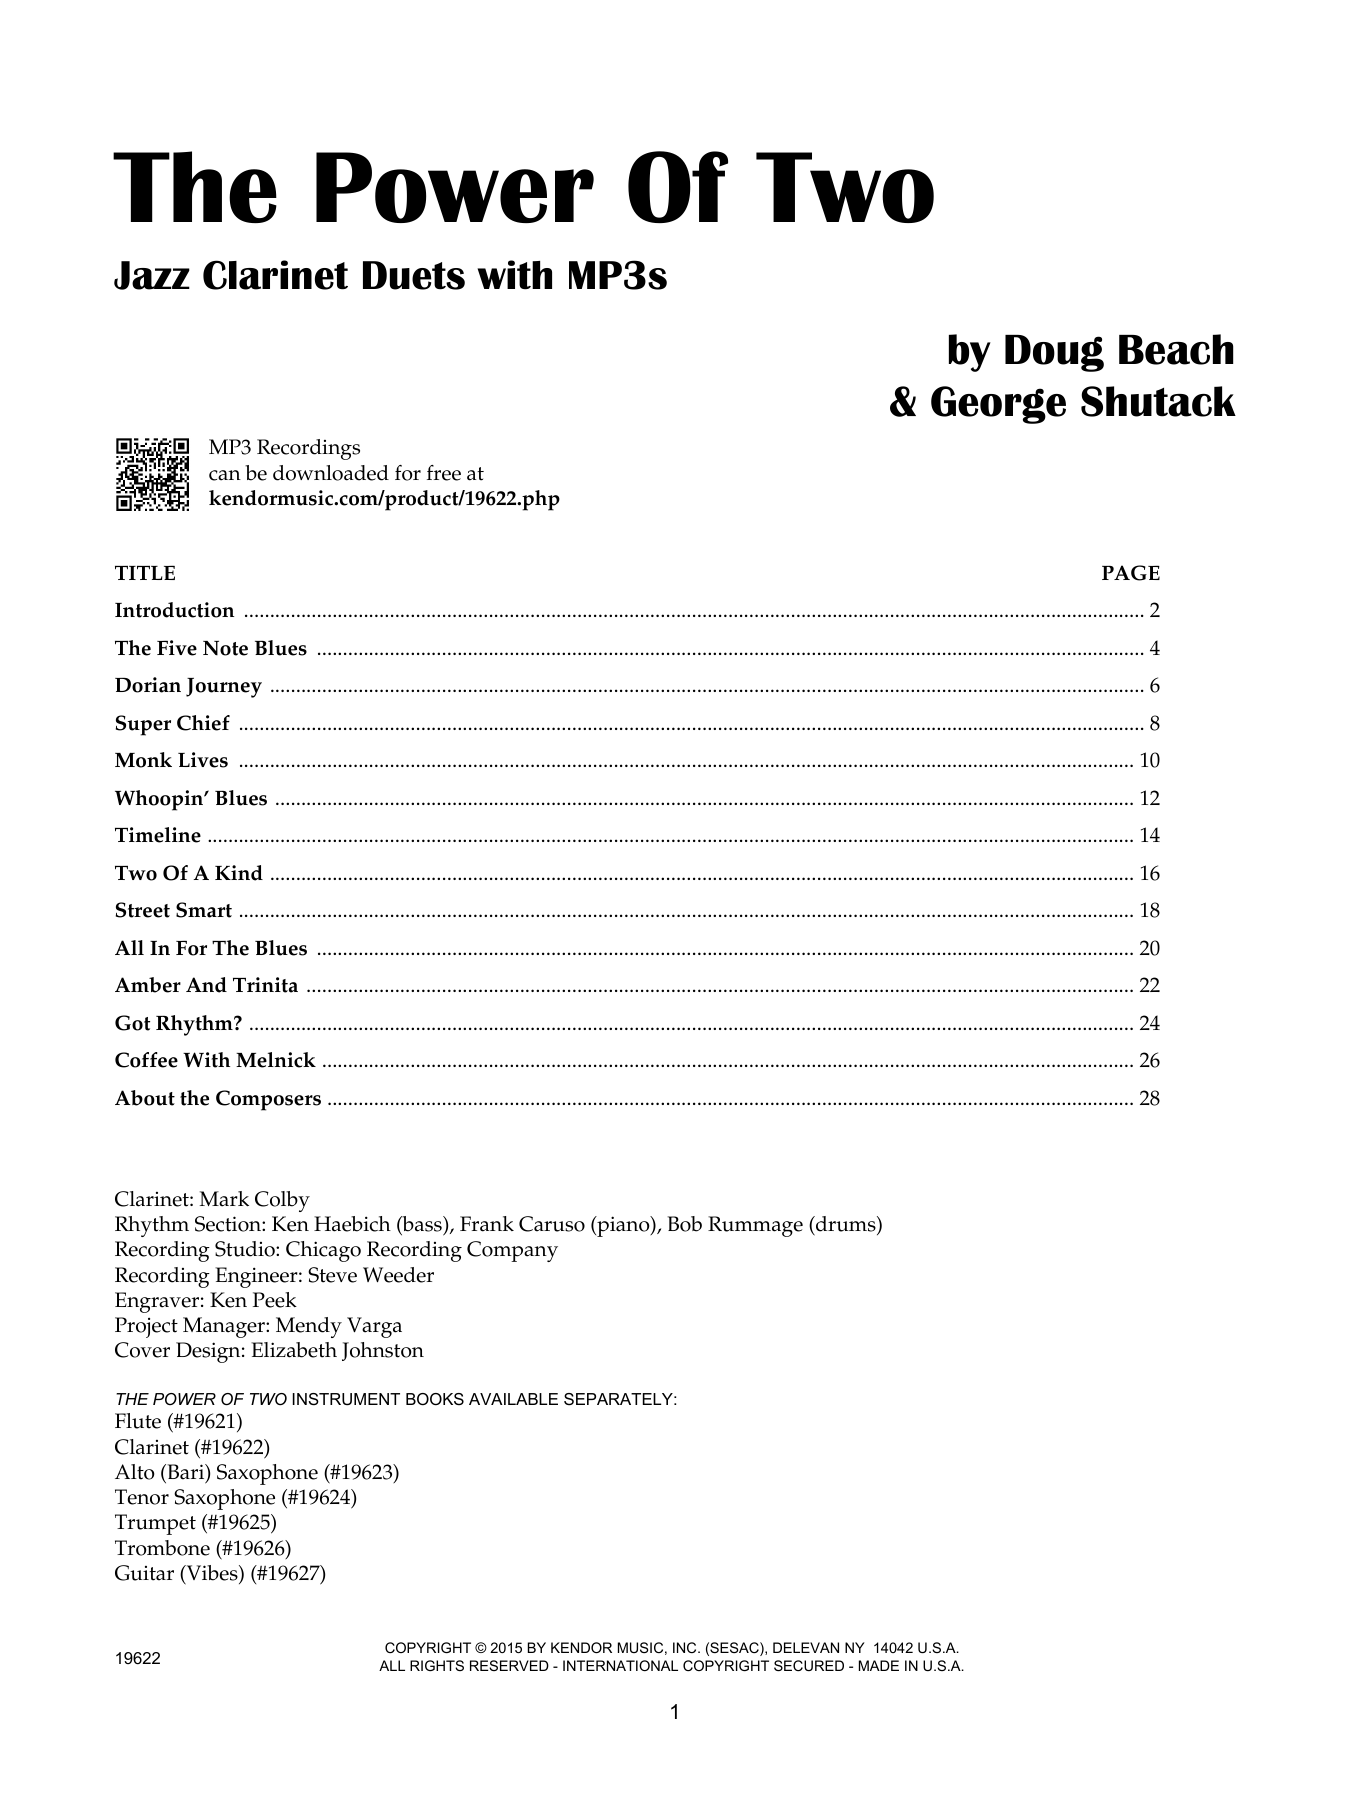 Download Doug Beach The Power Of Two - Clarinet Sheet Music